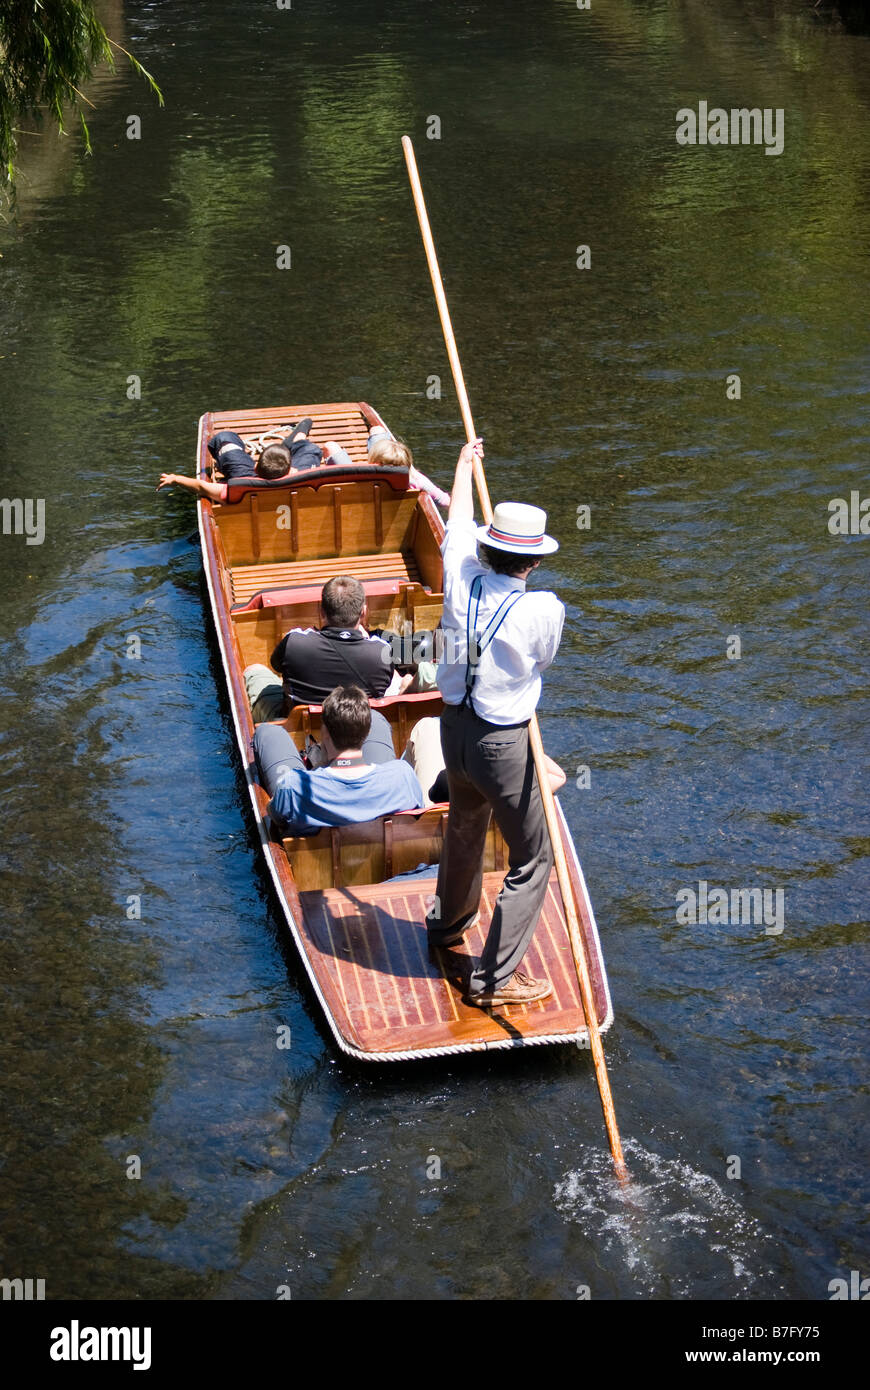 Punting on River Avon, Oxford Terrace, Christchurch, Canterbury, New Zealand Stock Photo